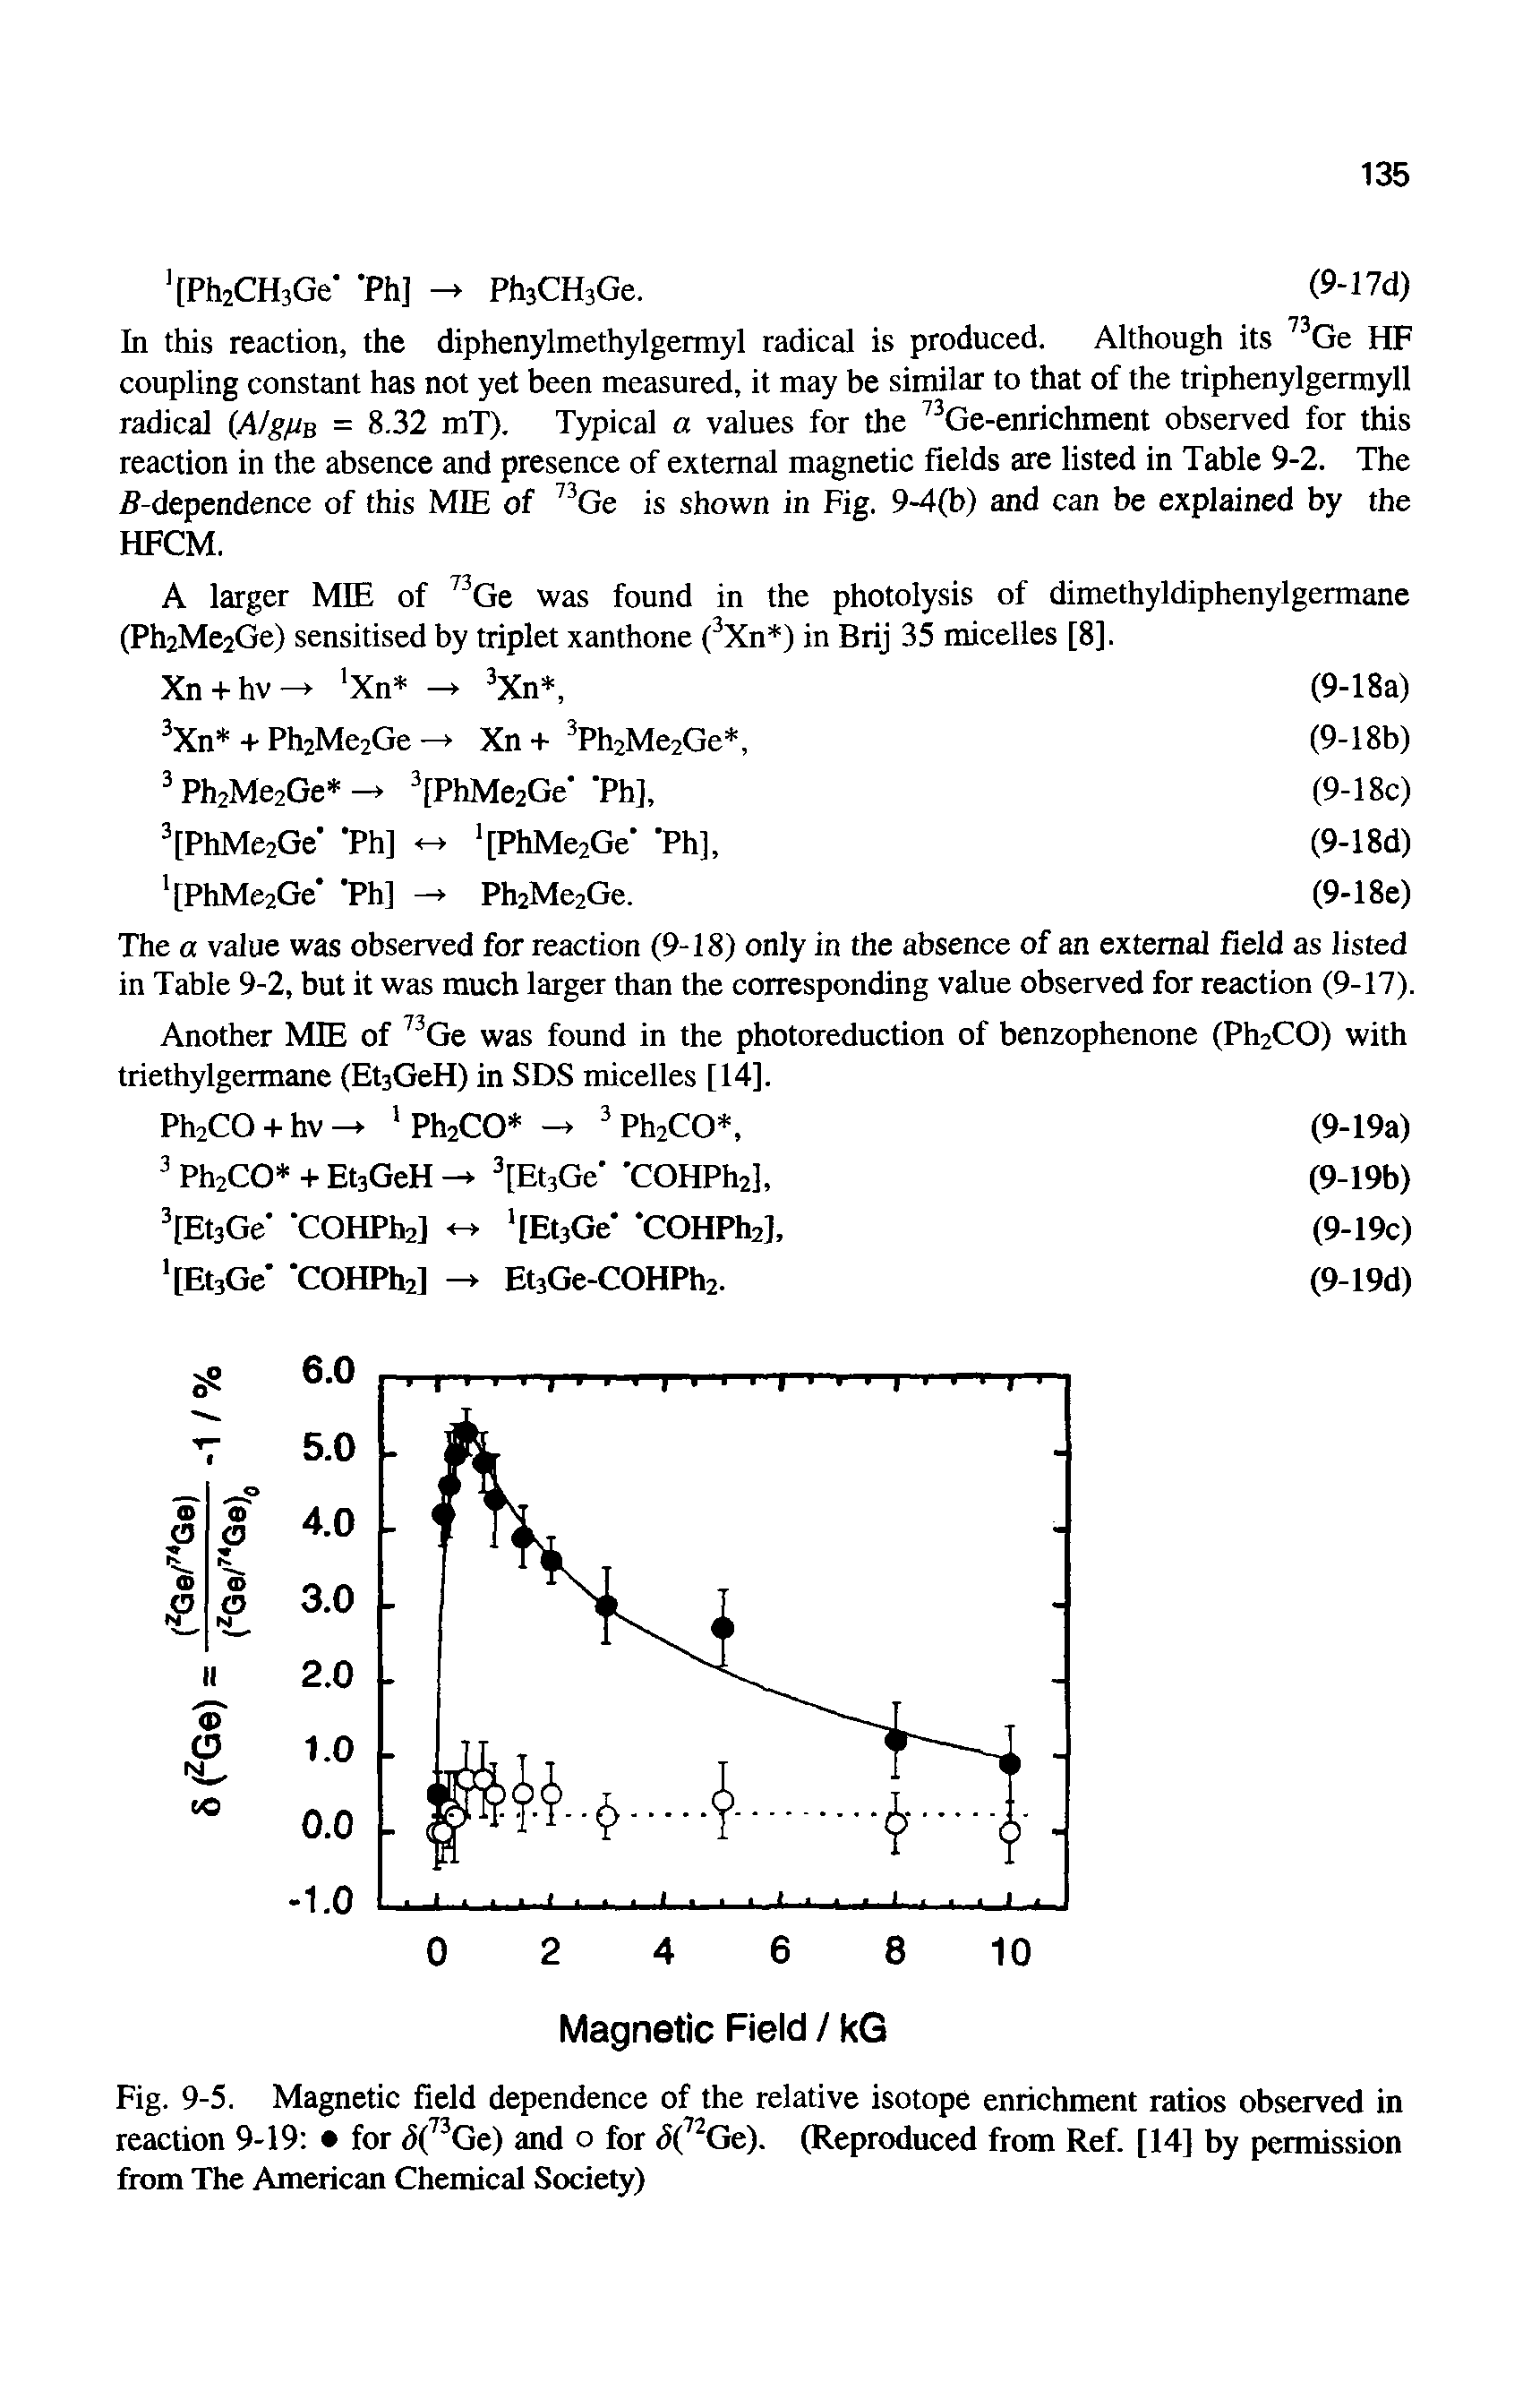 Fig. 9-5. Magnetic field dependence of the relative isotope enrichment ratios observed in reaction 9-19 for ( Ge) and o for J( Ge). (Reproduced from Ref. [14] by permission from The American Chemical Society)...